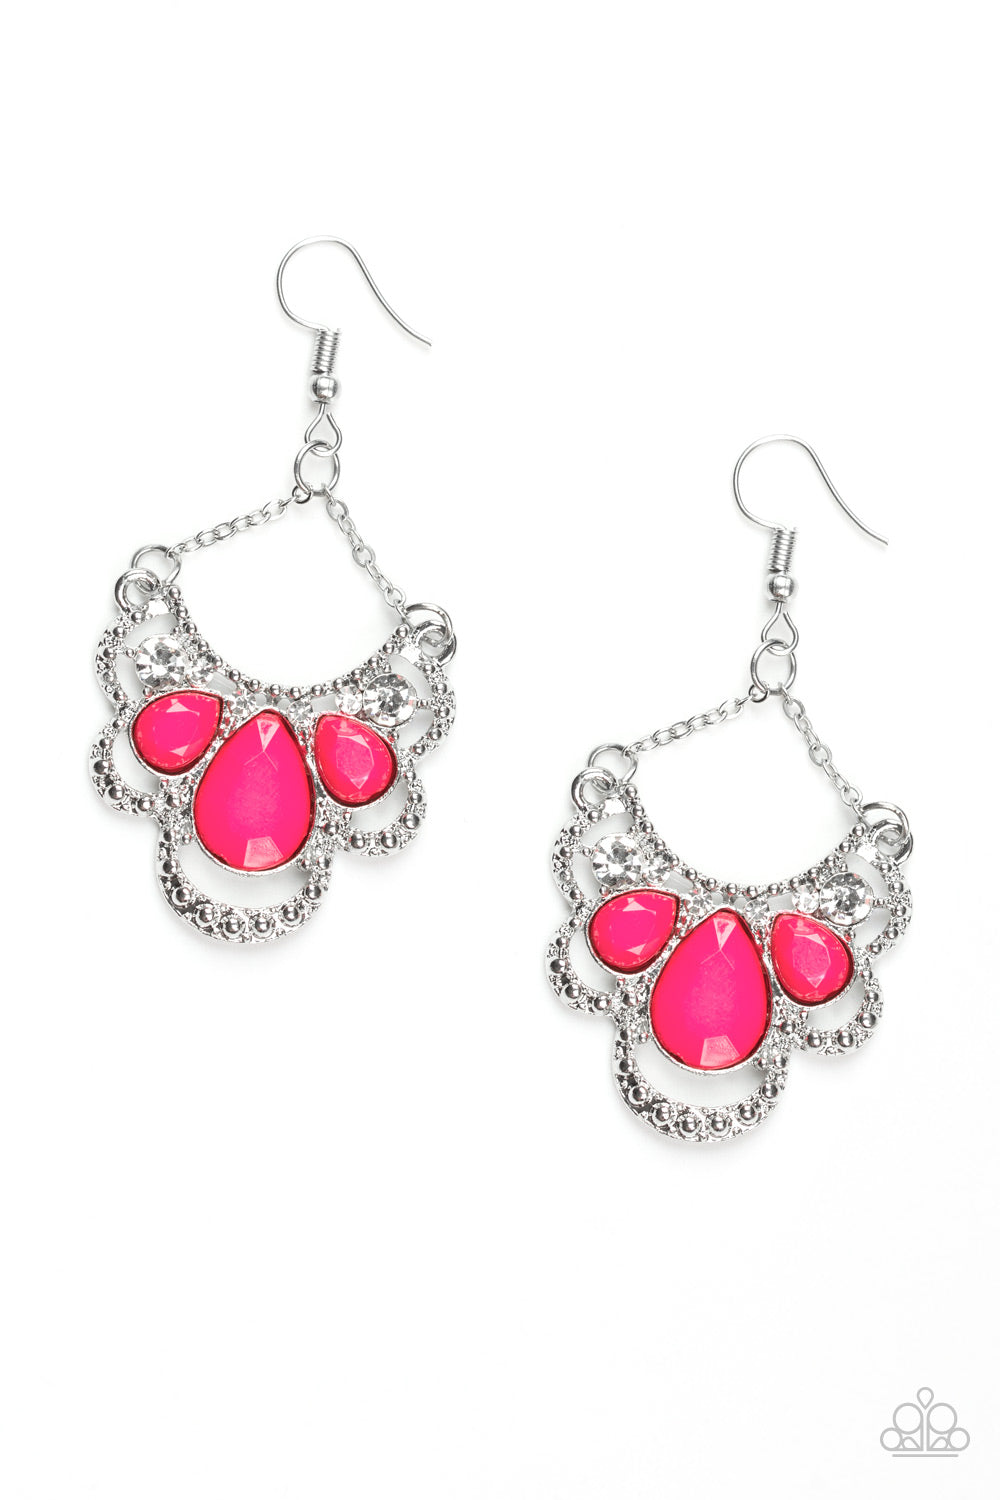 five-dollar-jewelry-caribbean-royalty-pink-earrings-paparazzi-accessories